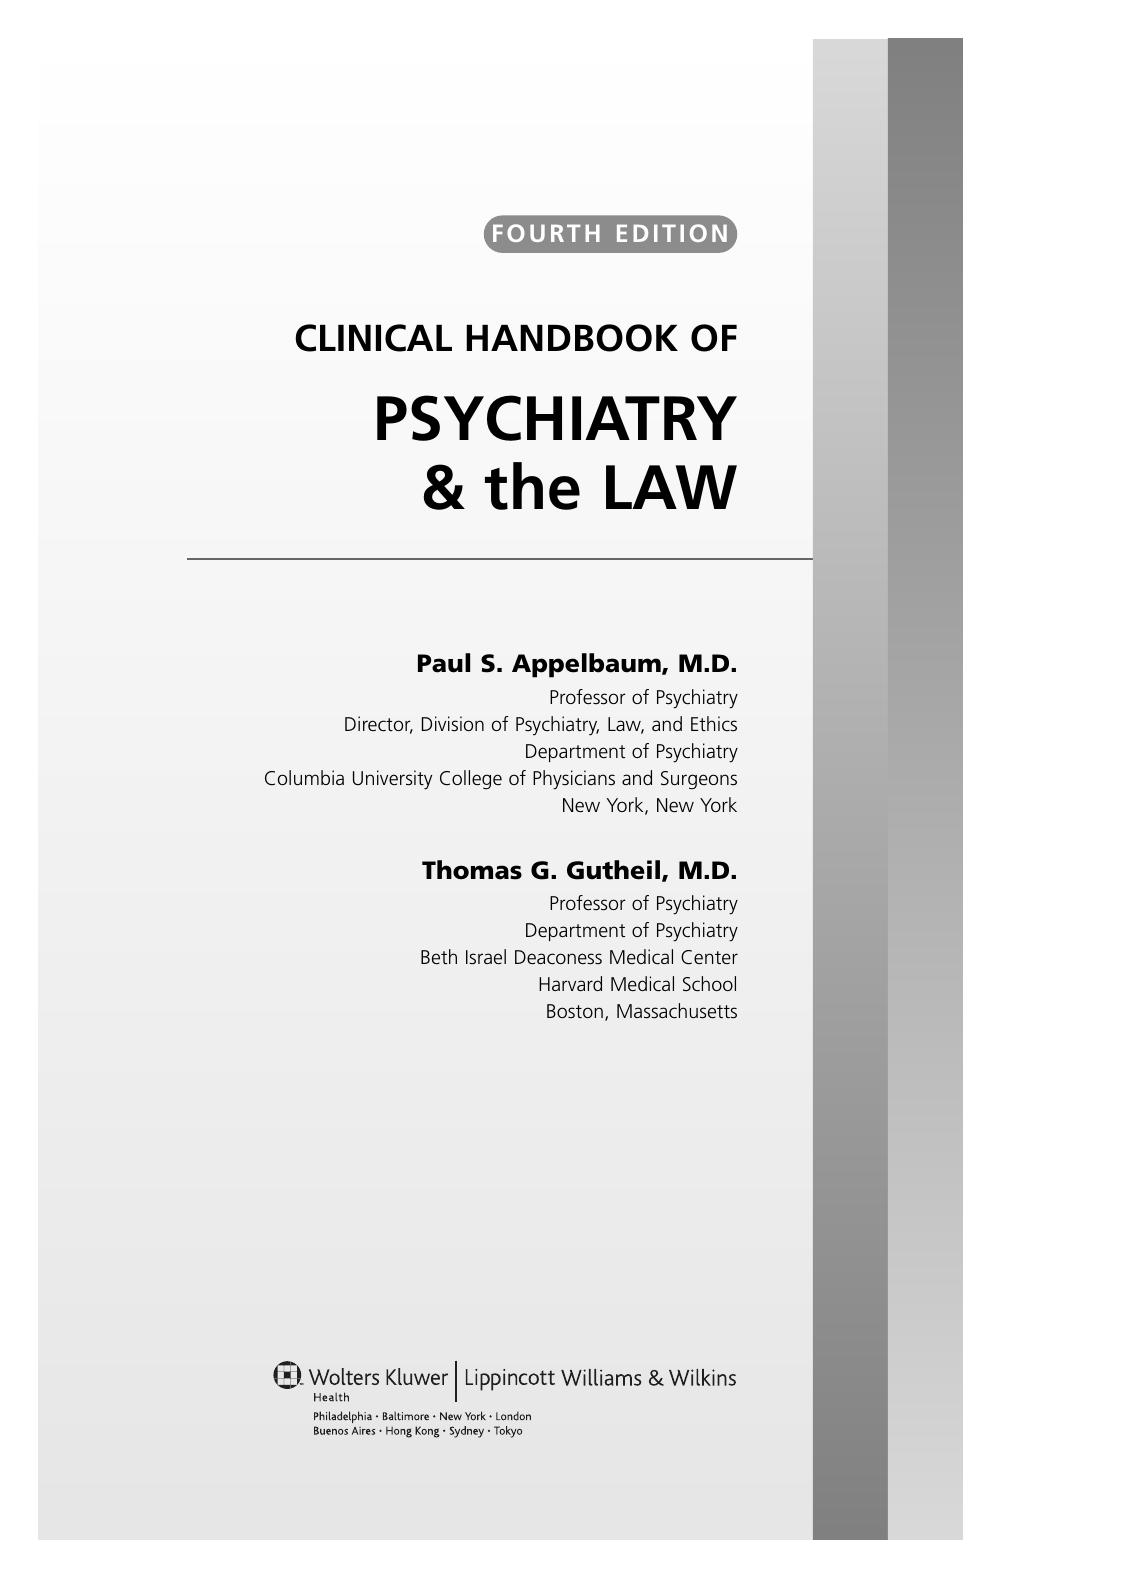 Clinical Handbook of Psychiatry and the Law (CLINICAL HANDBOOK OF PSYCHIATRY & THE LAW 4th ed 2007